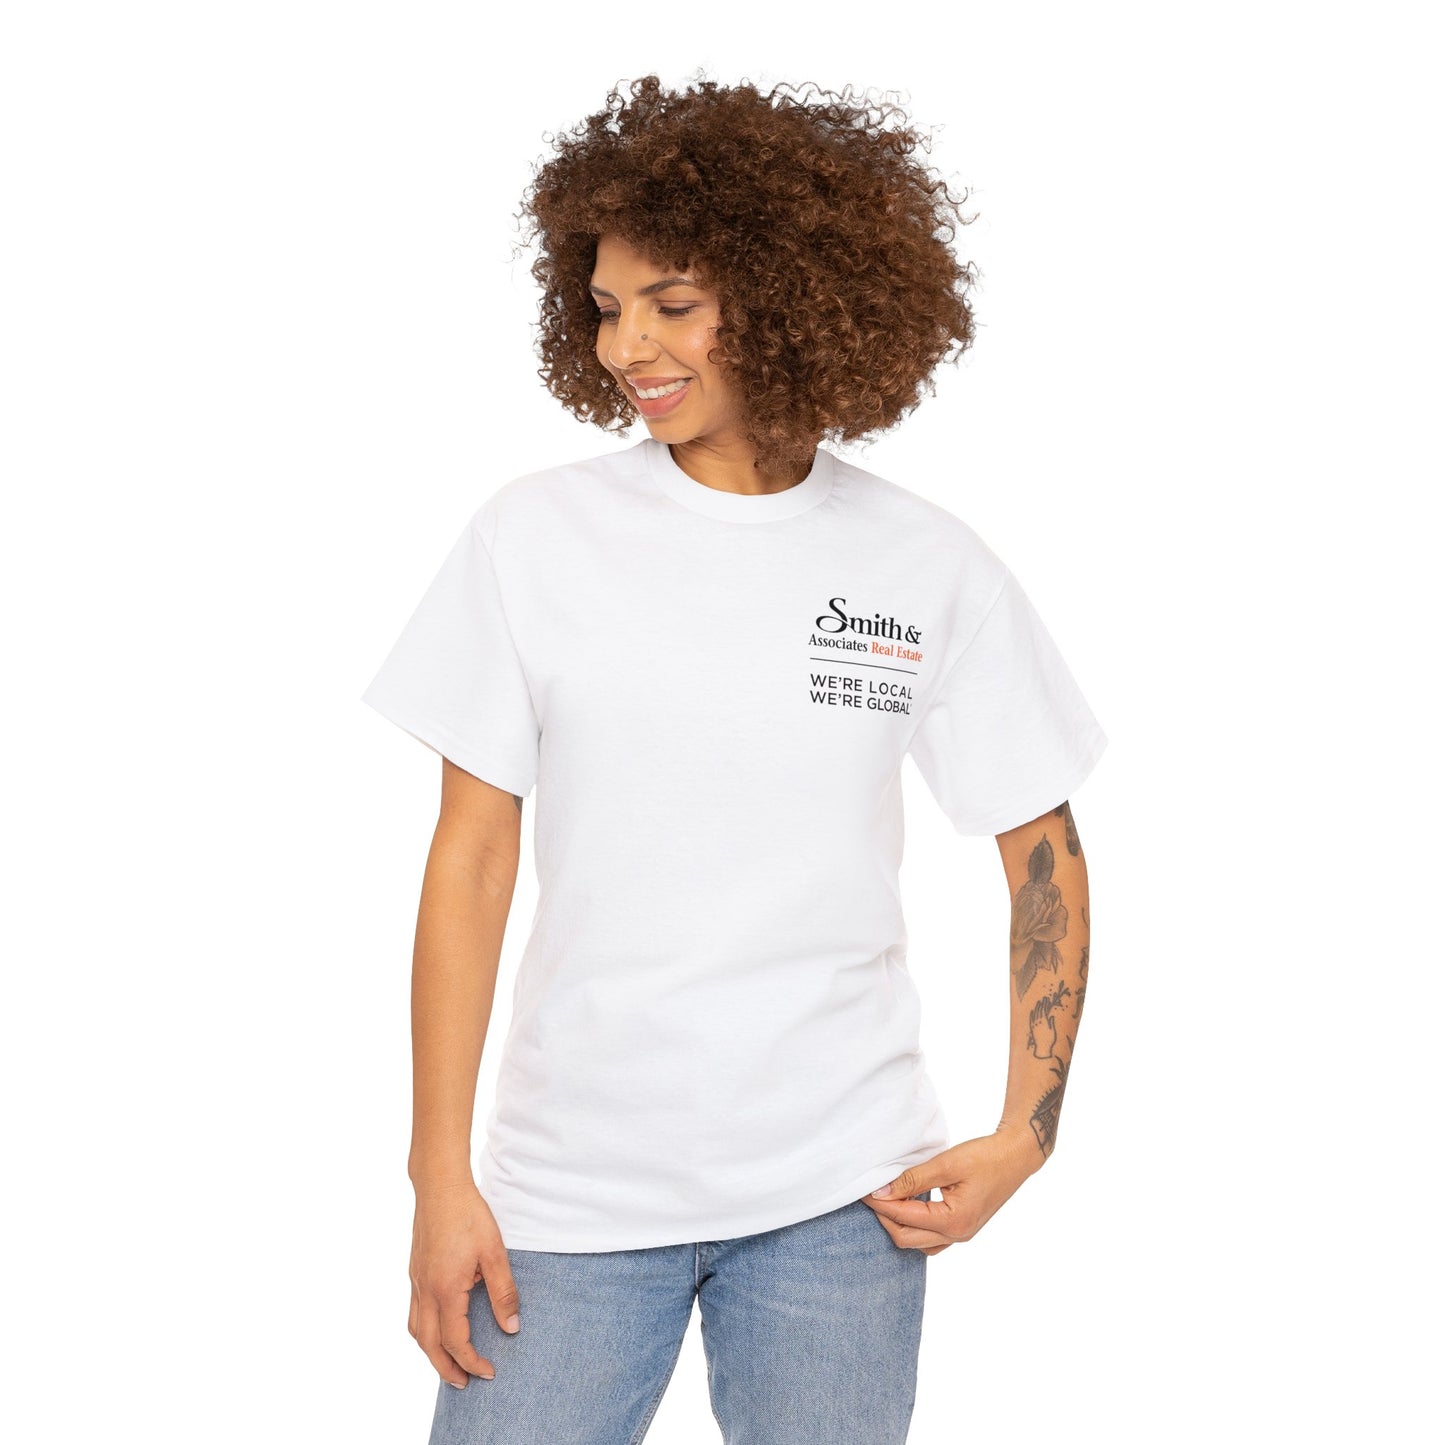 We're Local We're Global Smith & Associates T-Shirt